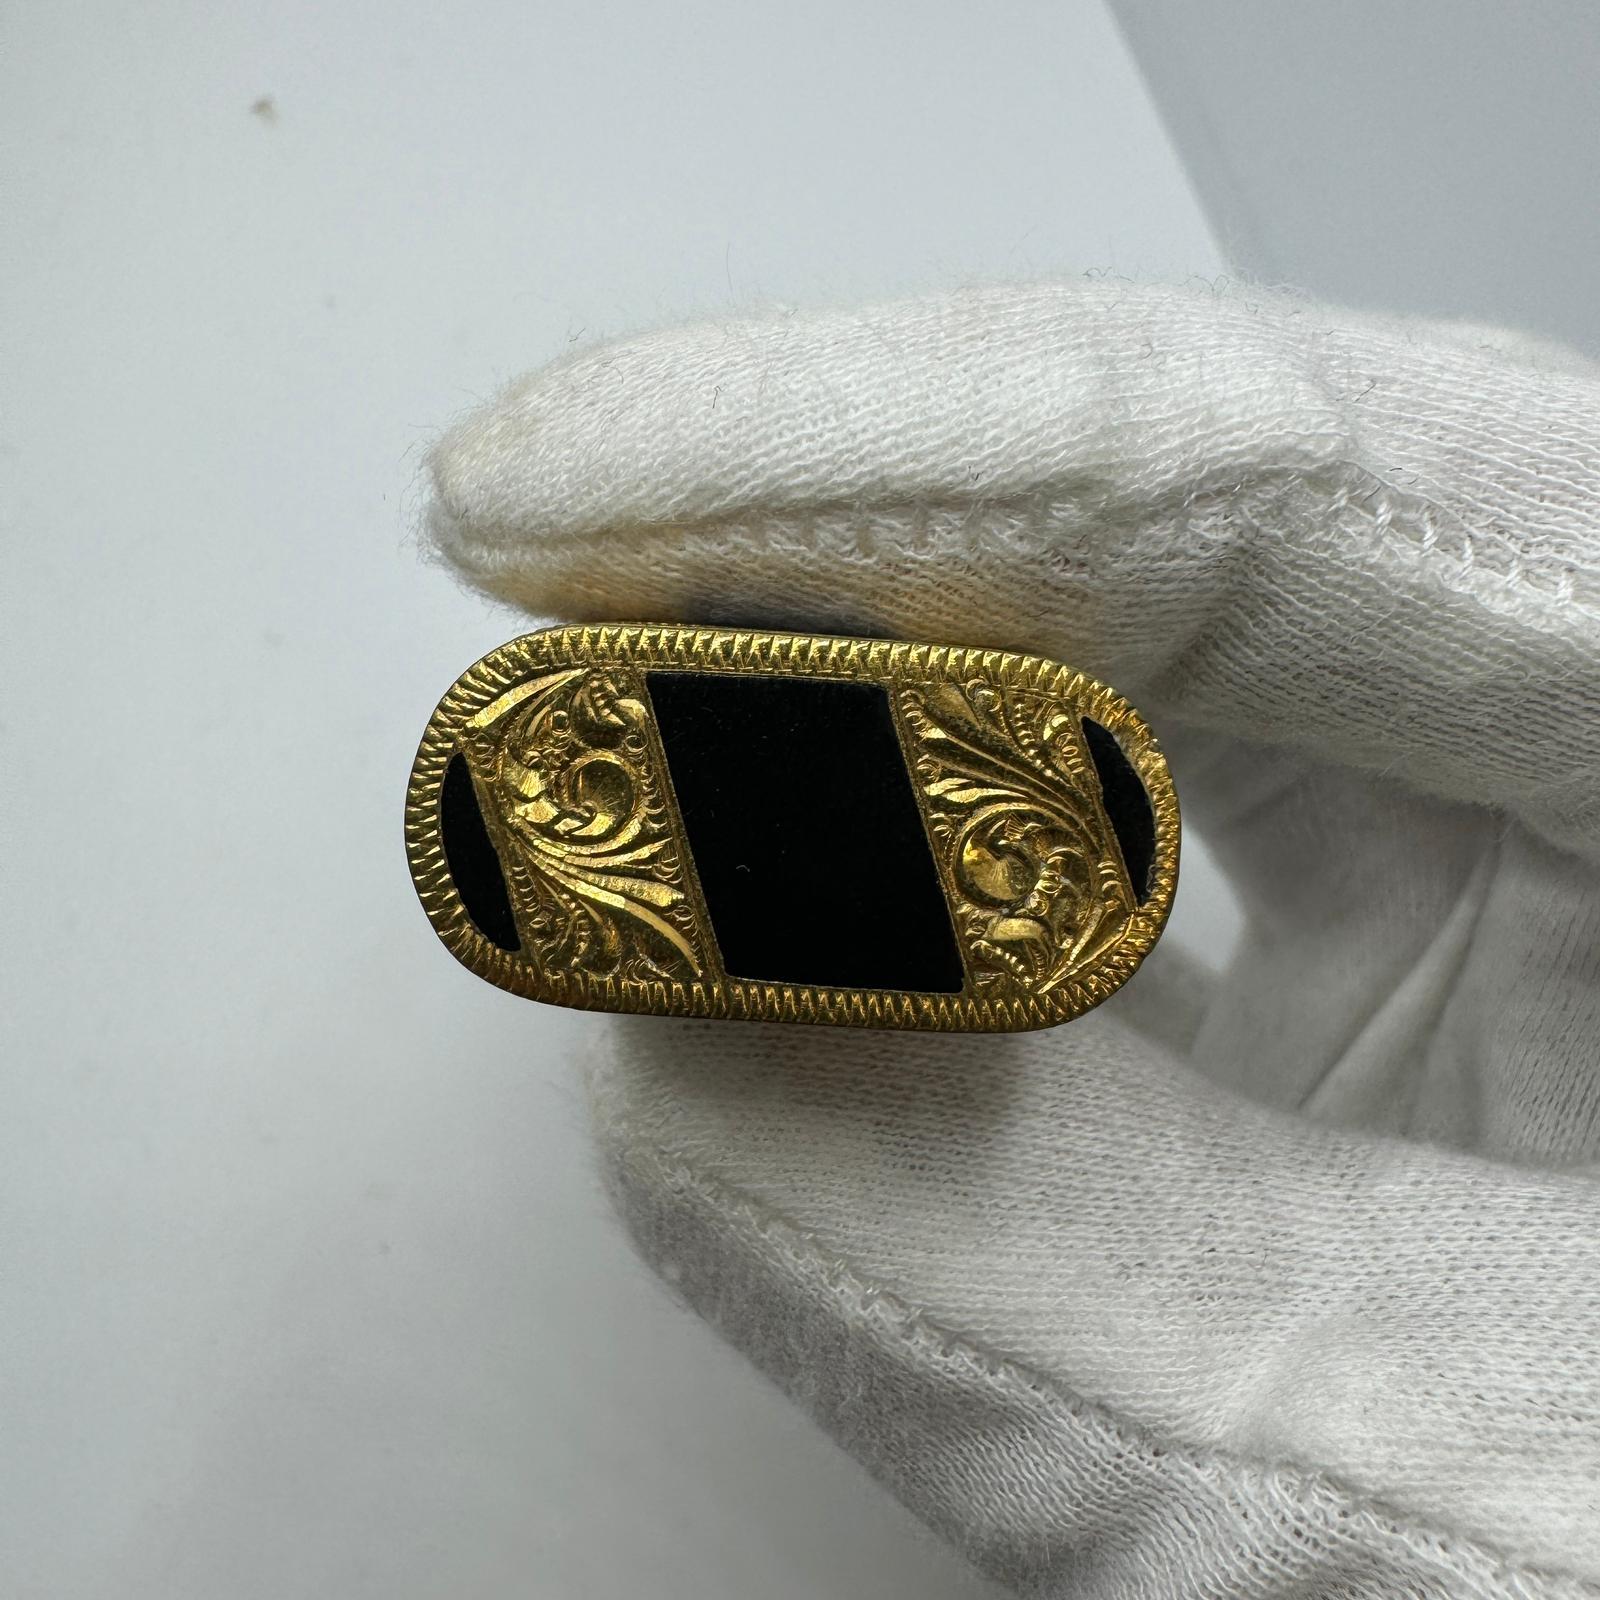 Rare Vintage Cartier circa 1980 18k Gold and Lacquer “Royking” Lighter For Sale 3